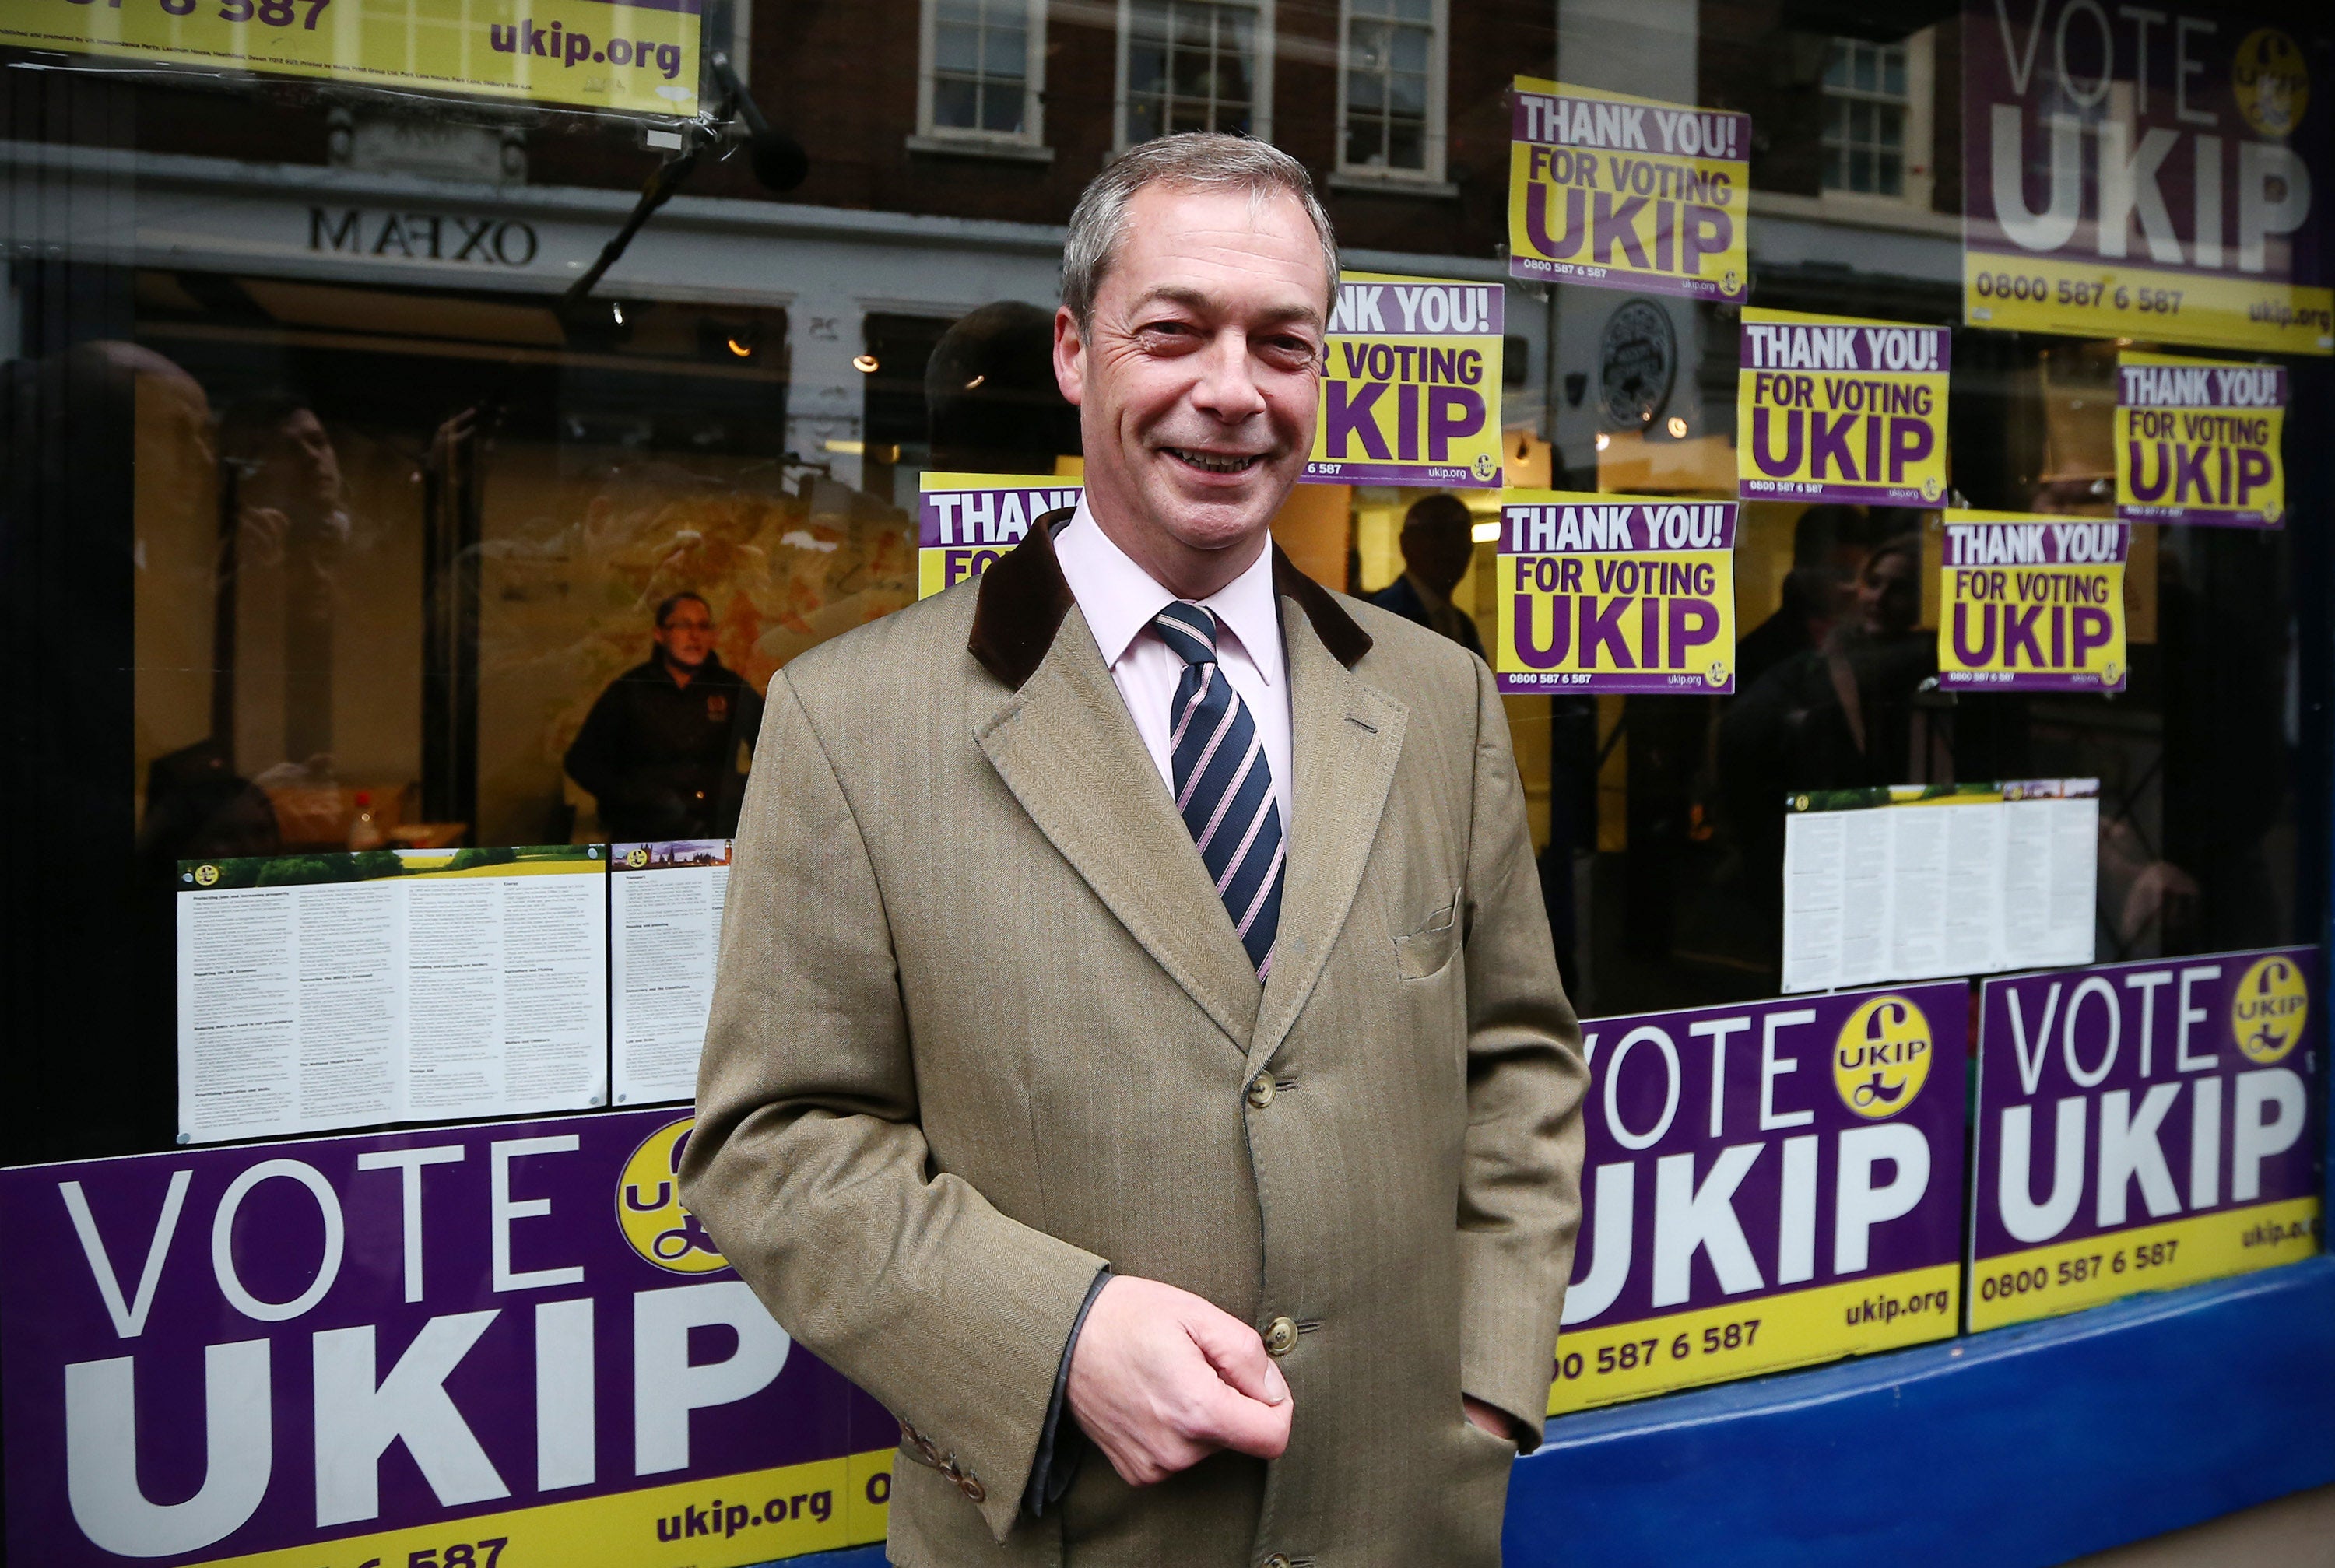 In late 2012, opinion polls placed Farage and Ukip in third place ahead of the Liberal Democrats